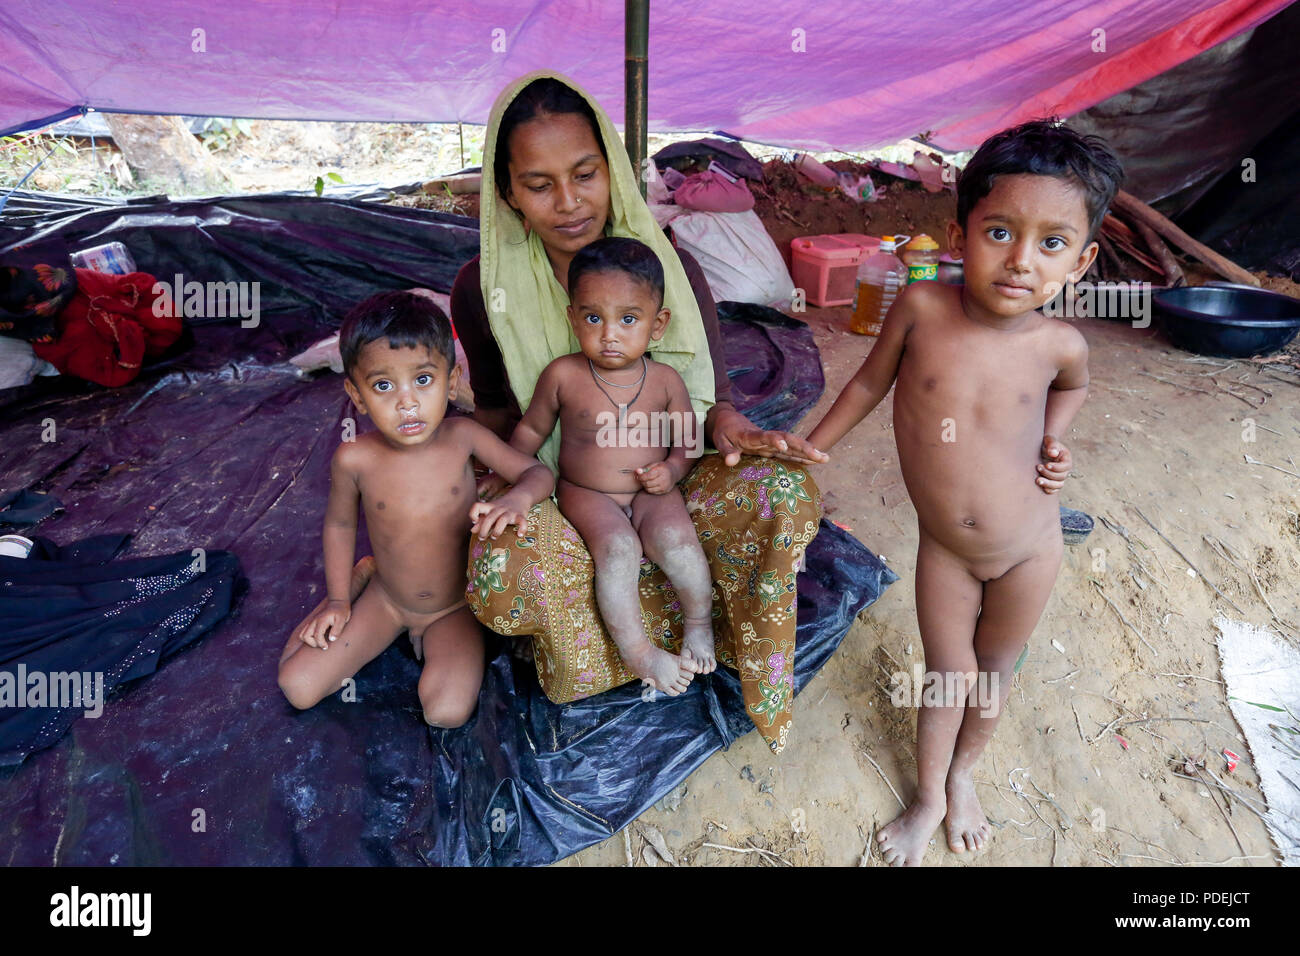 Newly arrived Rohingya refugees in their shelter at Kutupalong, Cox's Bazar, Bangladesh Stock Photo